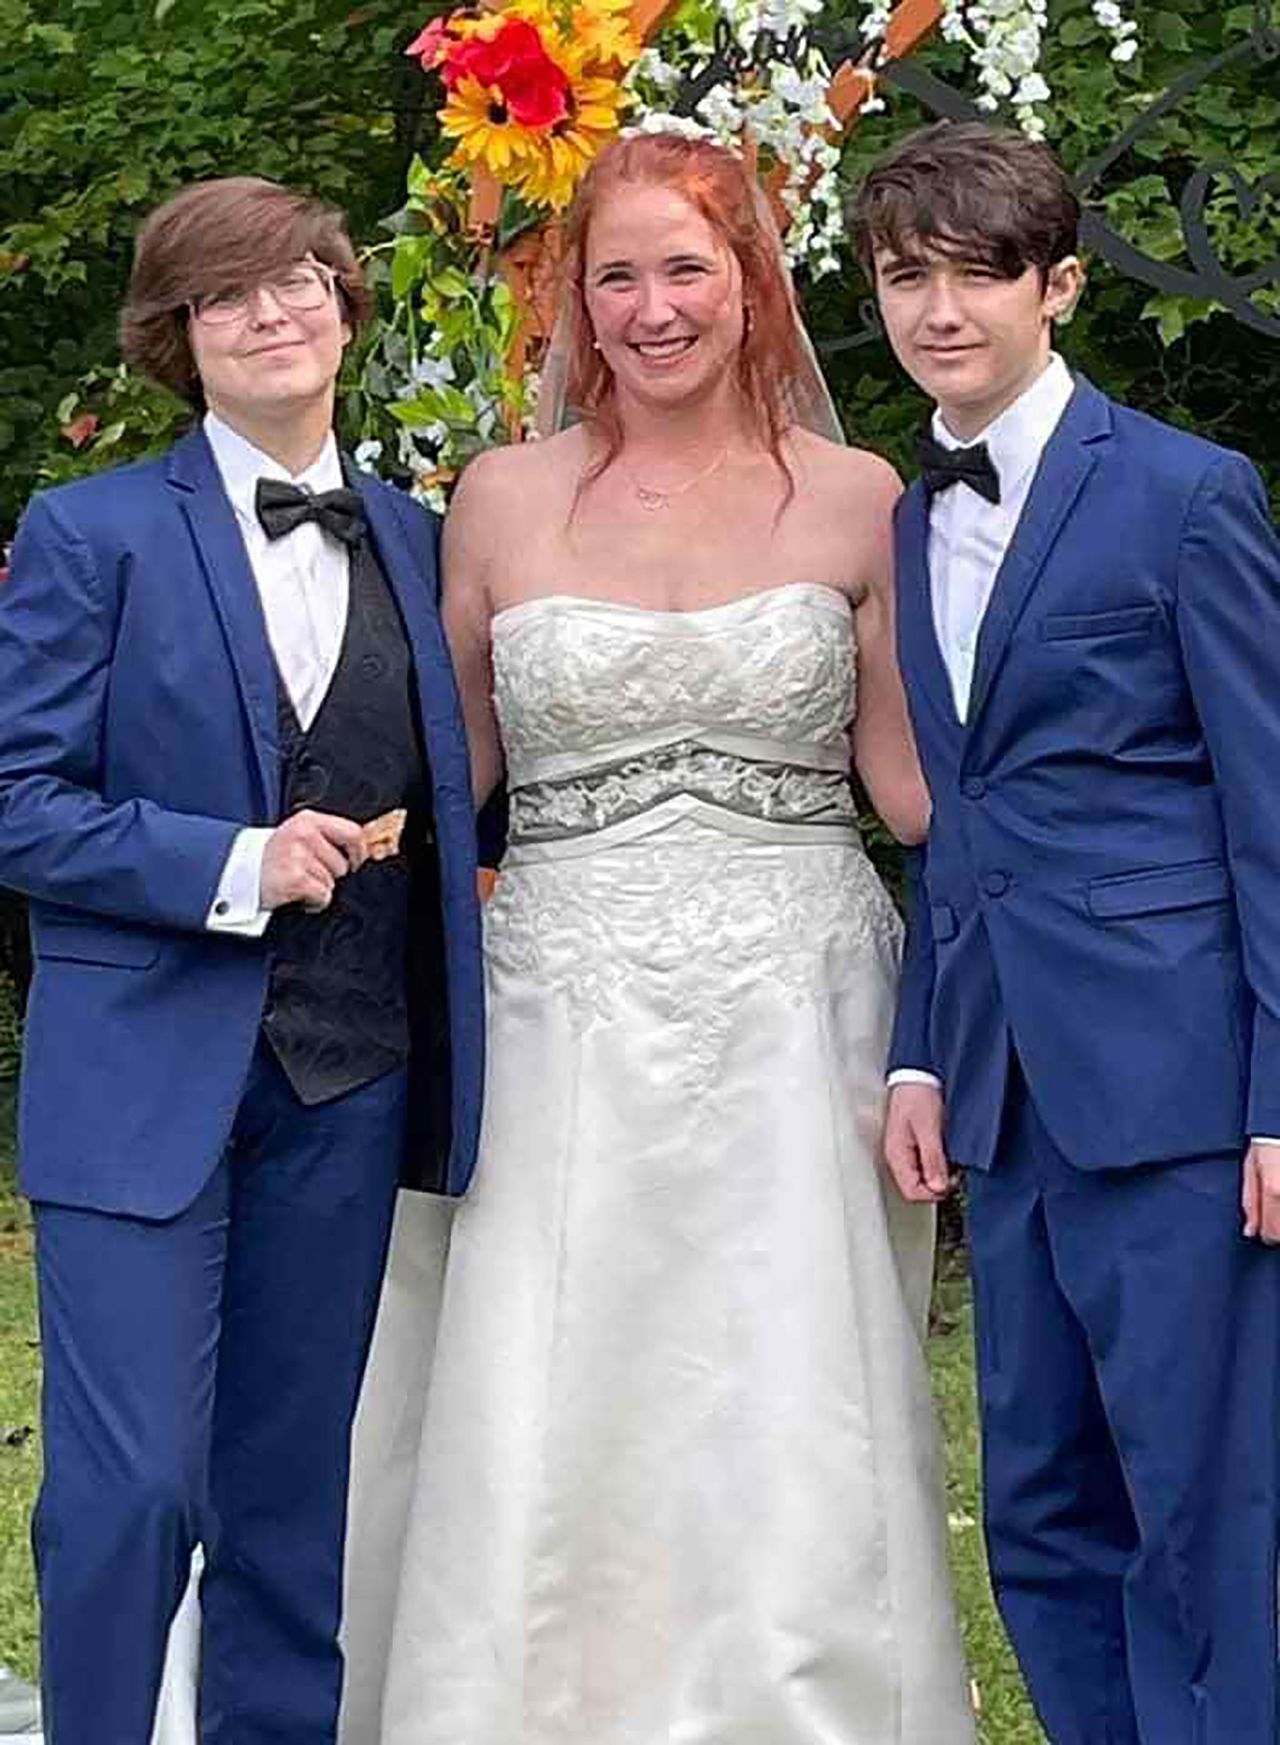 Mahoney poses with her two children at the full ceremony on September 25.